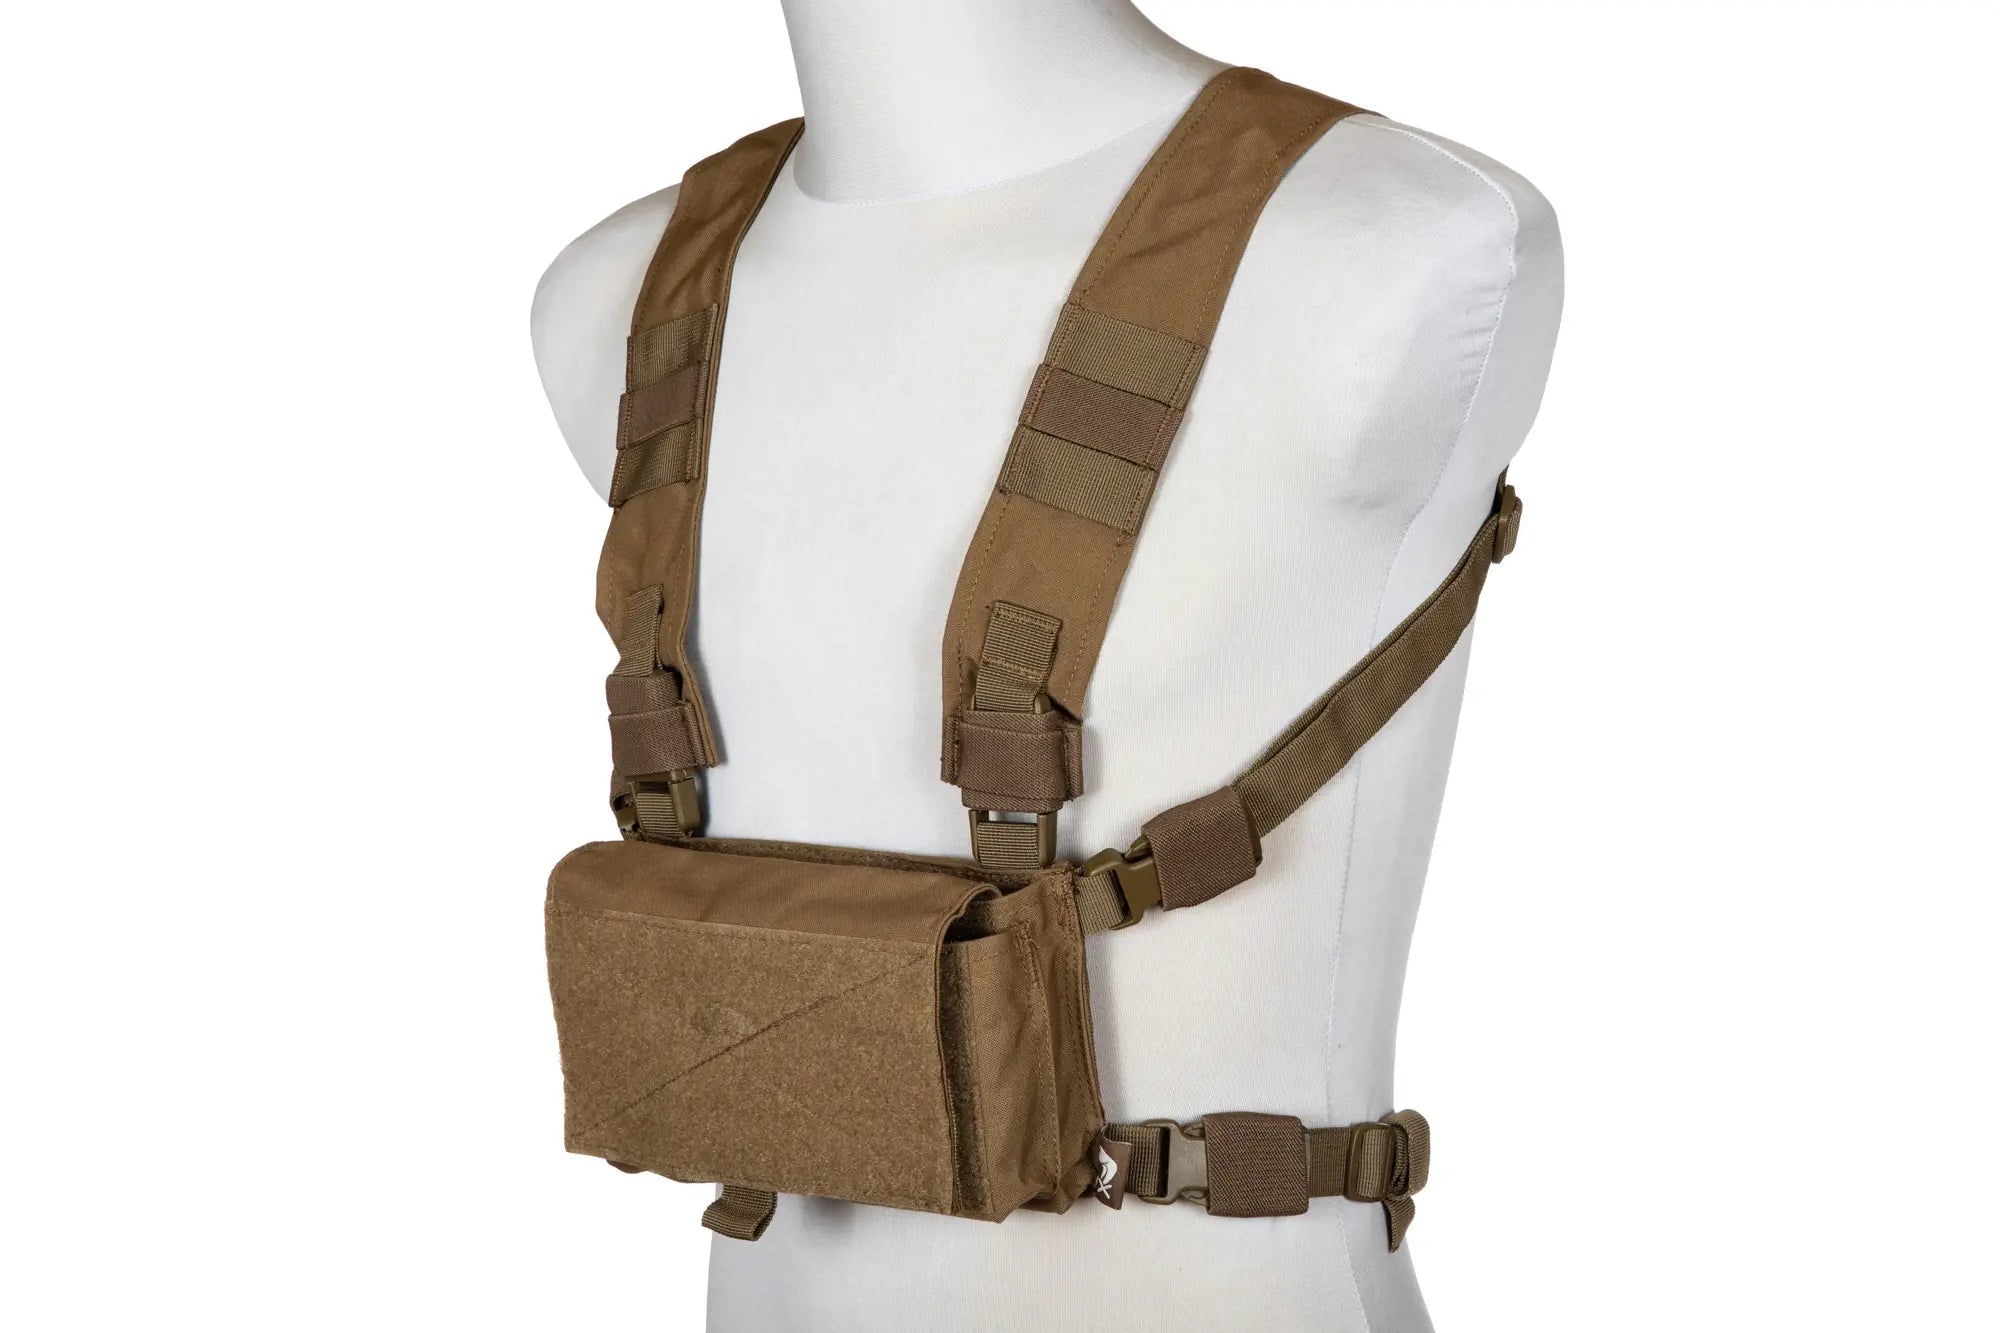 VX Buckle Up Utility Rig Tactical Vest - Coyote Brown